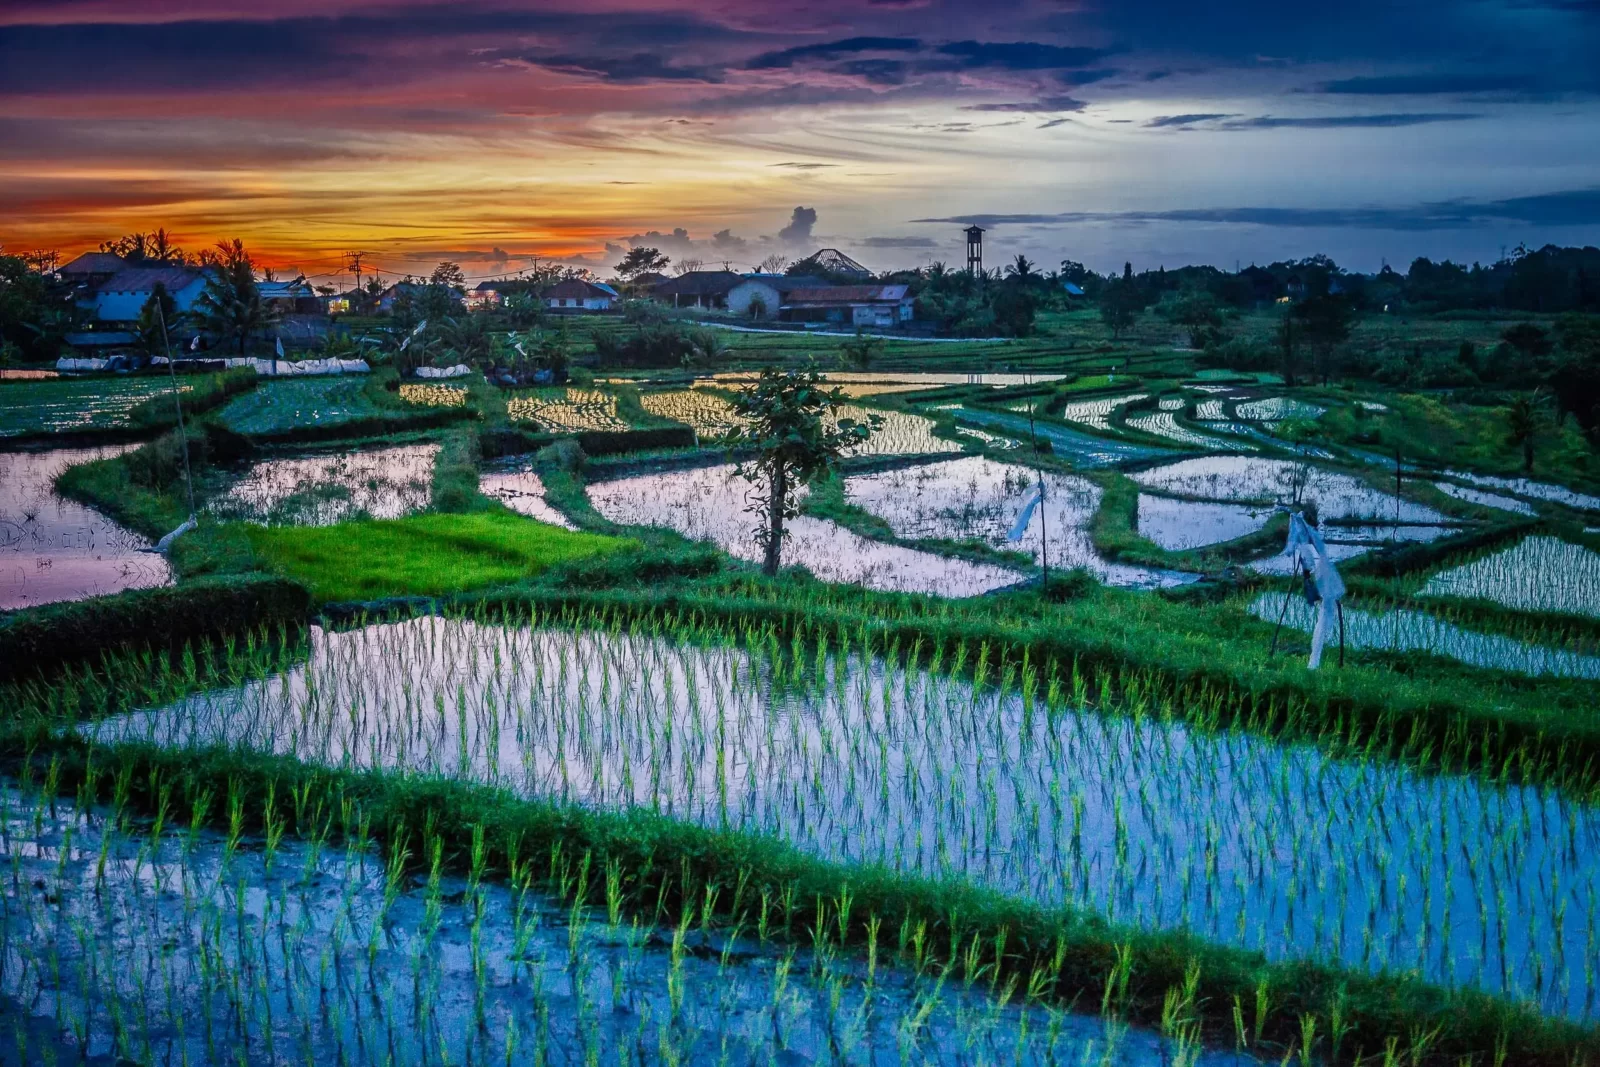 Sunset over rice paddy fields in Bali, Indonesia